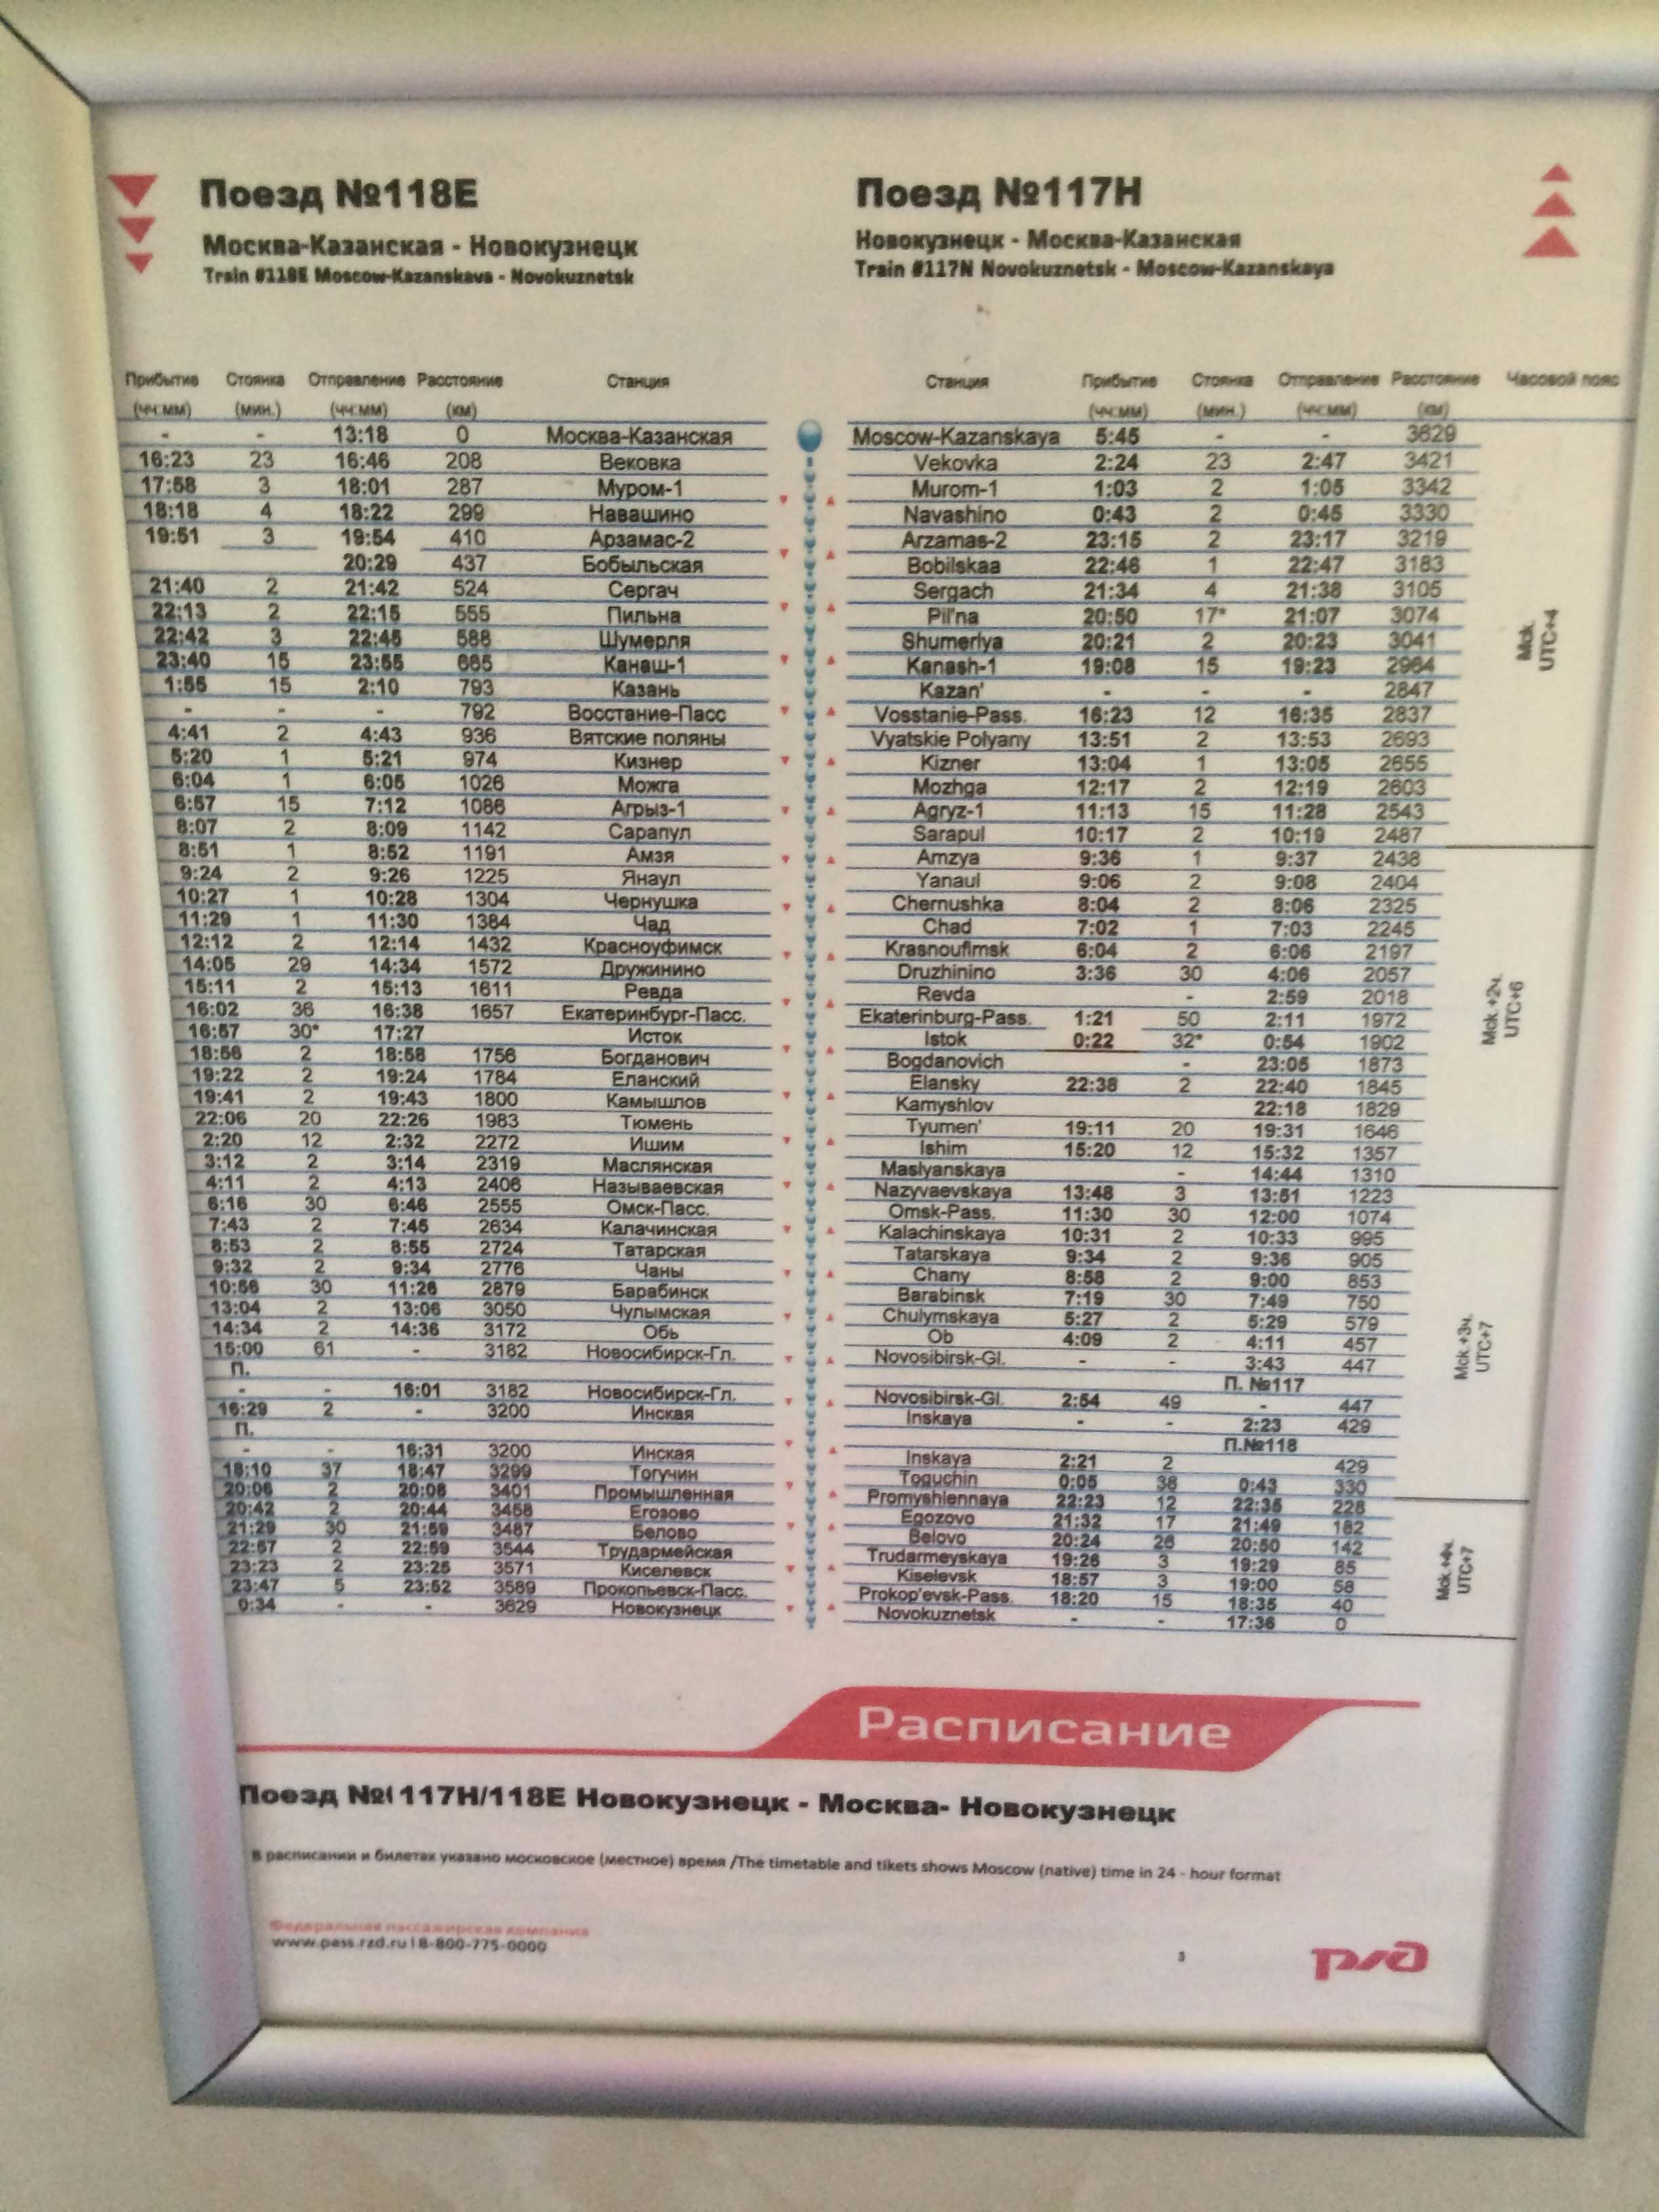 Example of the train schedule